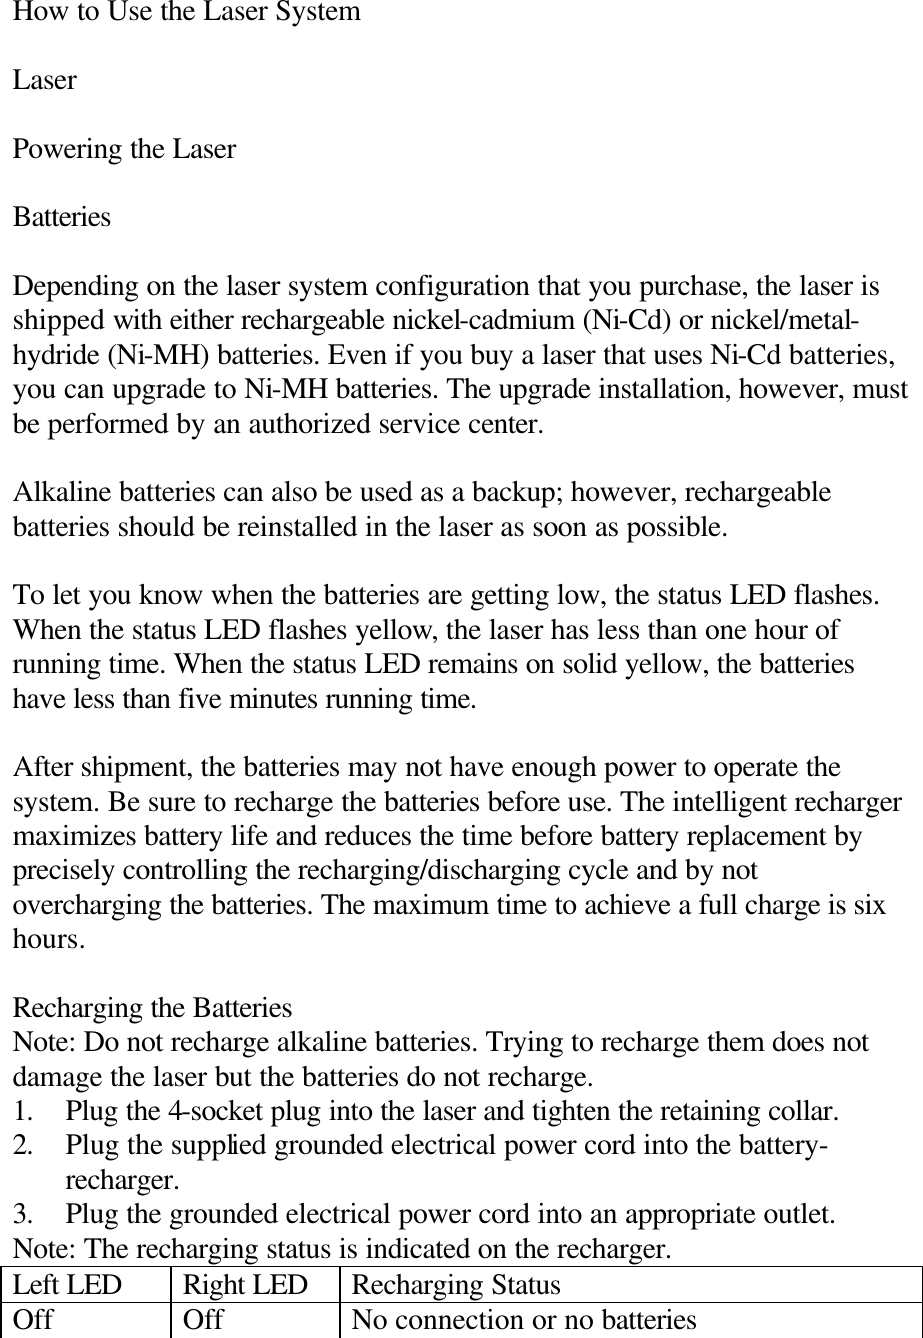 How to Use the Laser System  Laser  Powering the Laser  Batteries  Depending on the laser system configuration that you purchase, the laser is shipped with either rechargeable nickel-cadmium (Ni-Cd) or nickel/metal-hydride (Ni-MH) batteries. Even if you buy a laser that uses Ni-Cd batteries, you can upgrade to Ni-MH batteries. The upgrade installation, however, must be performed by an authorized service center.  Alkaline batteries can also be used as a backup; however, rechargeable batteries should be reinstalled in the laser as soon as possible.  To let you know when the batteries are getting low, the status LED flashes. When the status LED flashes yellow, the laser has less than one hour of running time. When the status LED remains on solid yellow, the batteries have less than five minutes running time.  After shipment, the batteries may not have enough power to operate the system. Be sure to recharge the batteries before use. The intelligent recharger maximizes battery life and reduces the time before battery replacement by precisely controlling the recharging/discharging cycle and by not overcharging the batteries. The maximum time to achieve a full charge is six hours.  Recharging the Batteries Note: Do not recharge alkaline batteries. Trying to recharge them does not damage the laser but the batteries do not recharge. 1. Plug the 4-socket plug into the laser and tighten the retaining collar. 2. Plug the supplied grounded electrical power cord into the battery-recharger. 3. Plug the grounded electrical power cord into an appropriate outlet. Note: The recharging status is indicated on the recharger. Left LED Right LED Recharging Status Off Off No connection or no batteries 